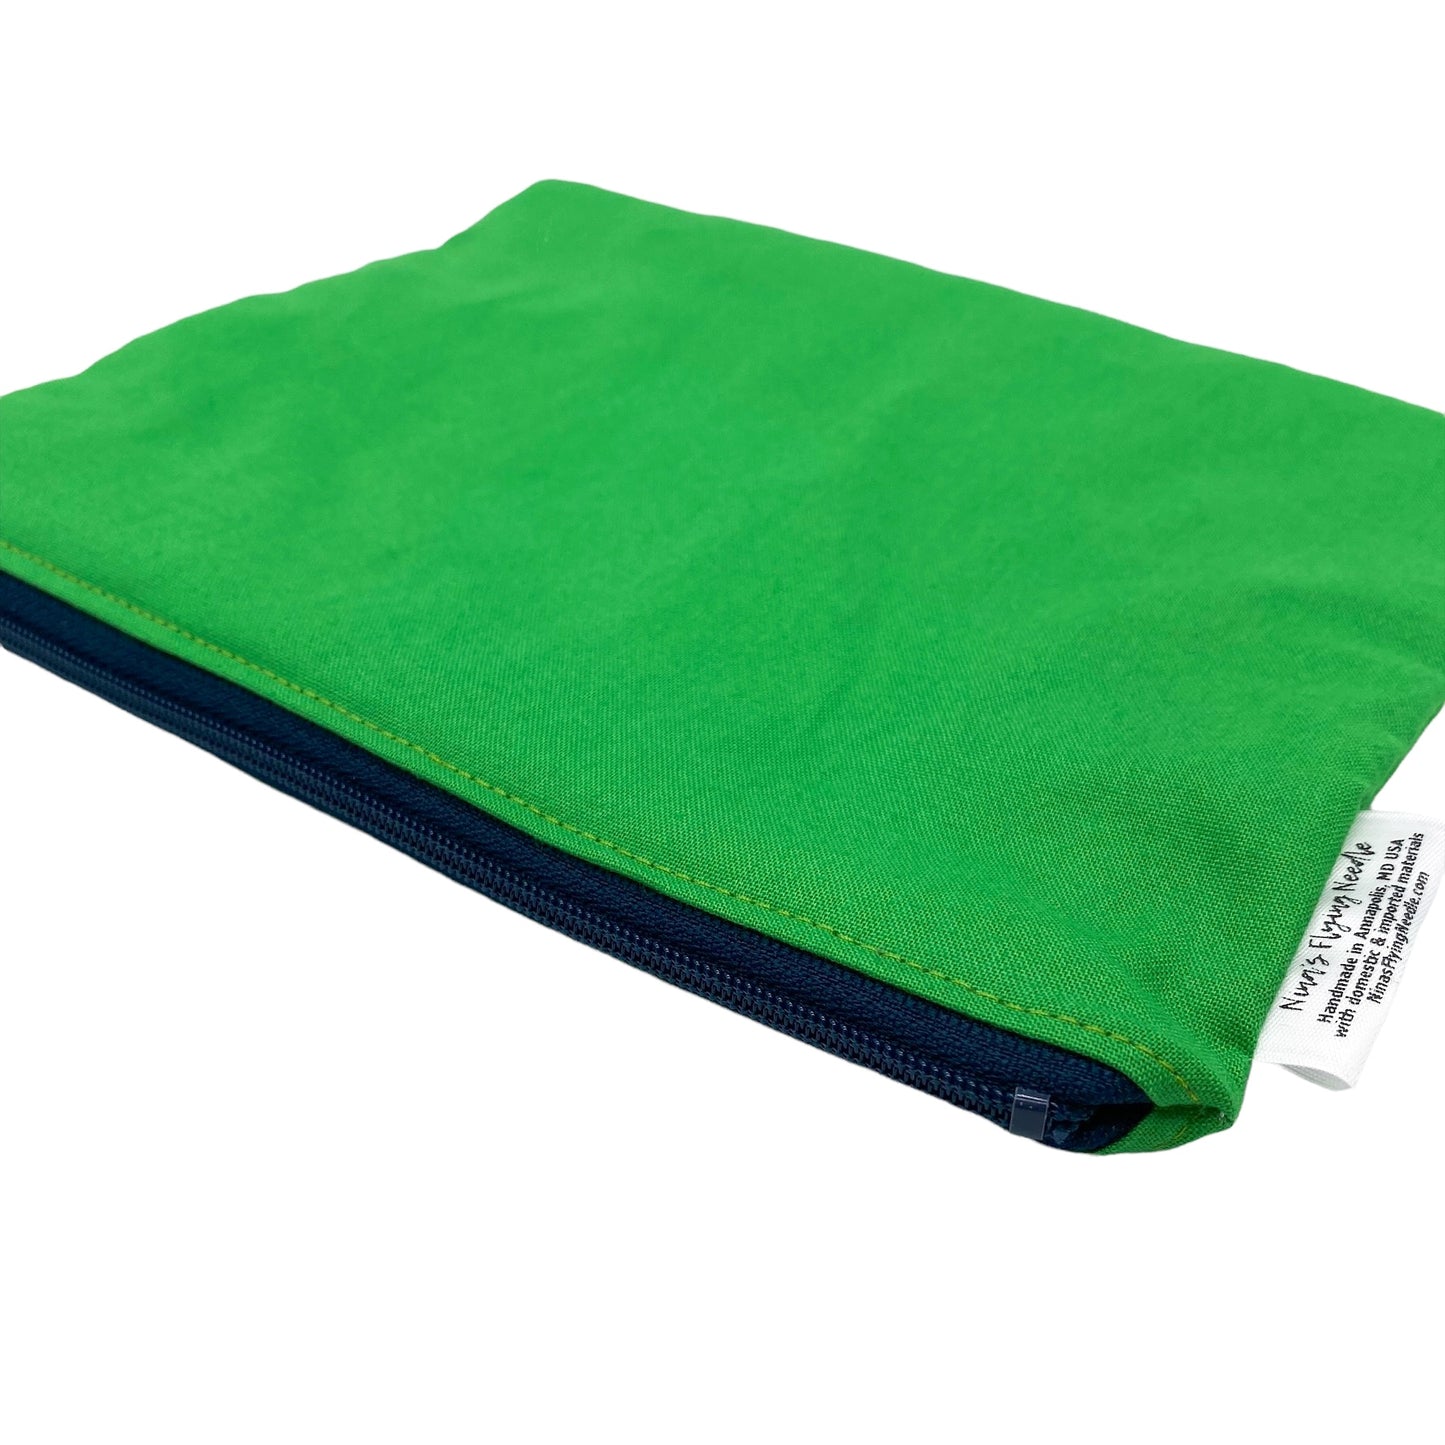 Sandwich Sized Reusable Zippered Bag Solid Green